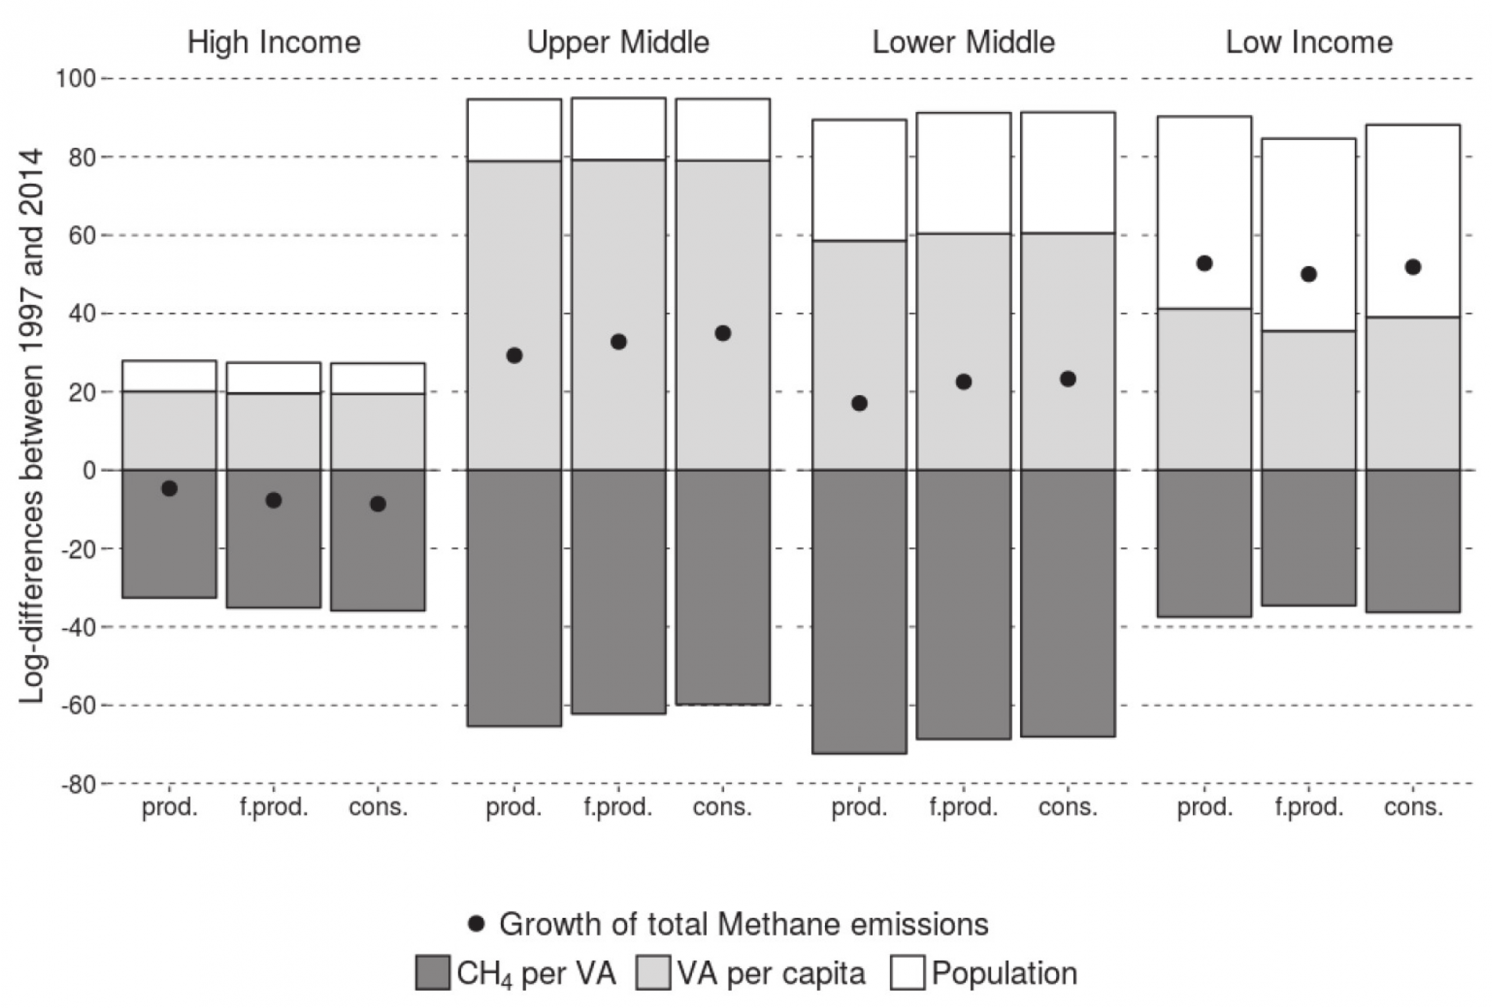 Kaya-based decompositions of the growth rate of methane emissions (1997—2014)